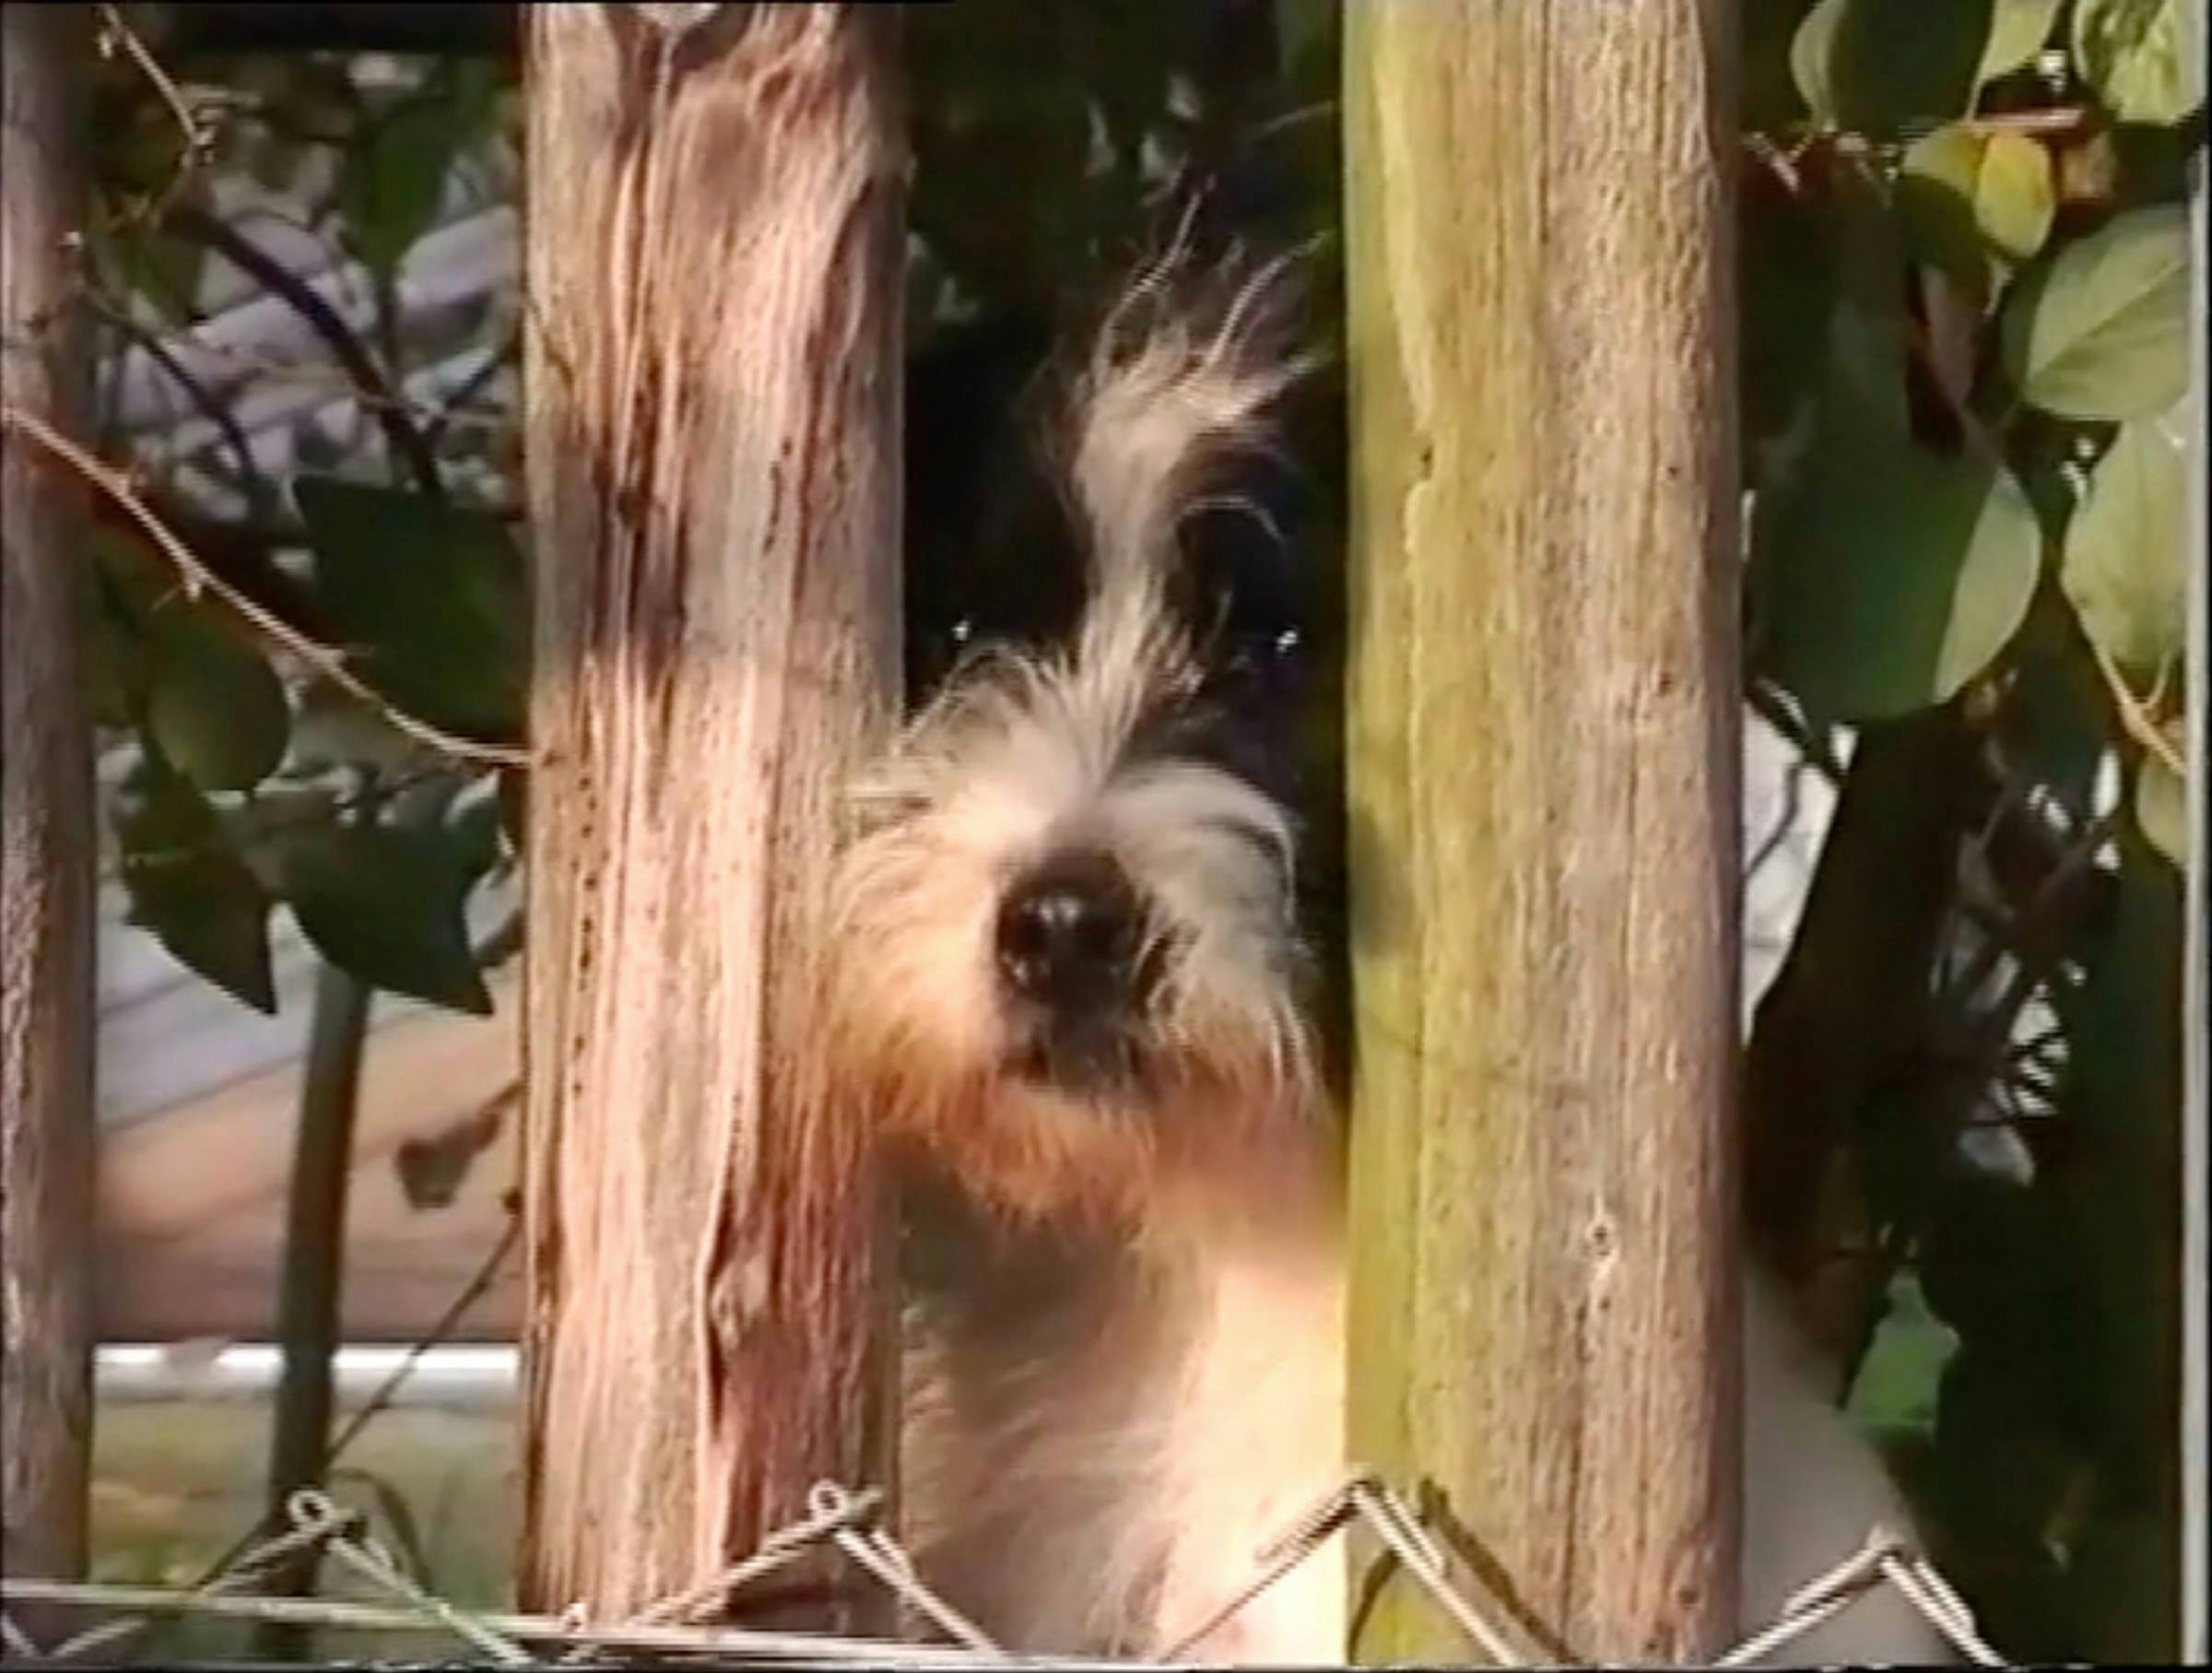 Image of a dog behind a wooden fence, poking his face through the slats